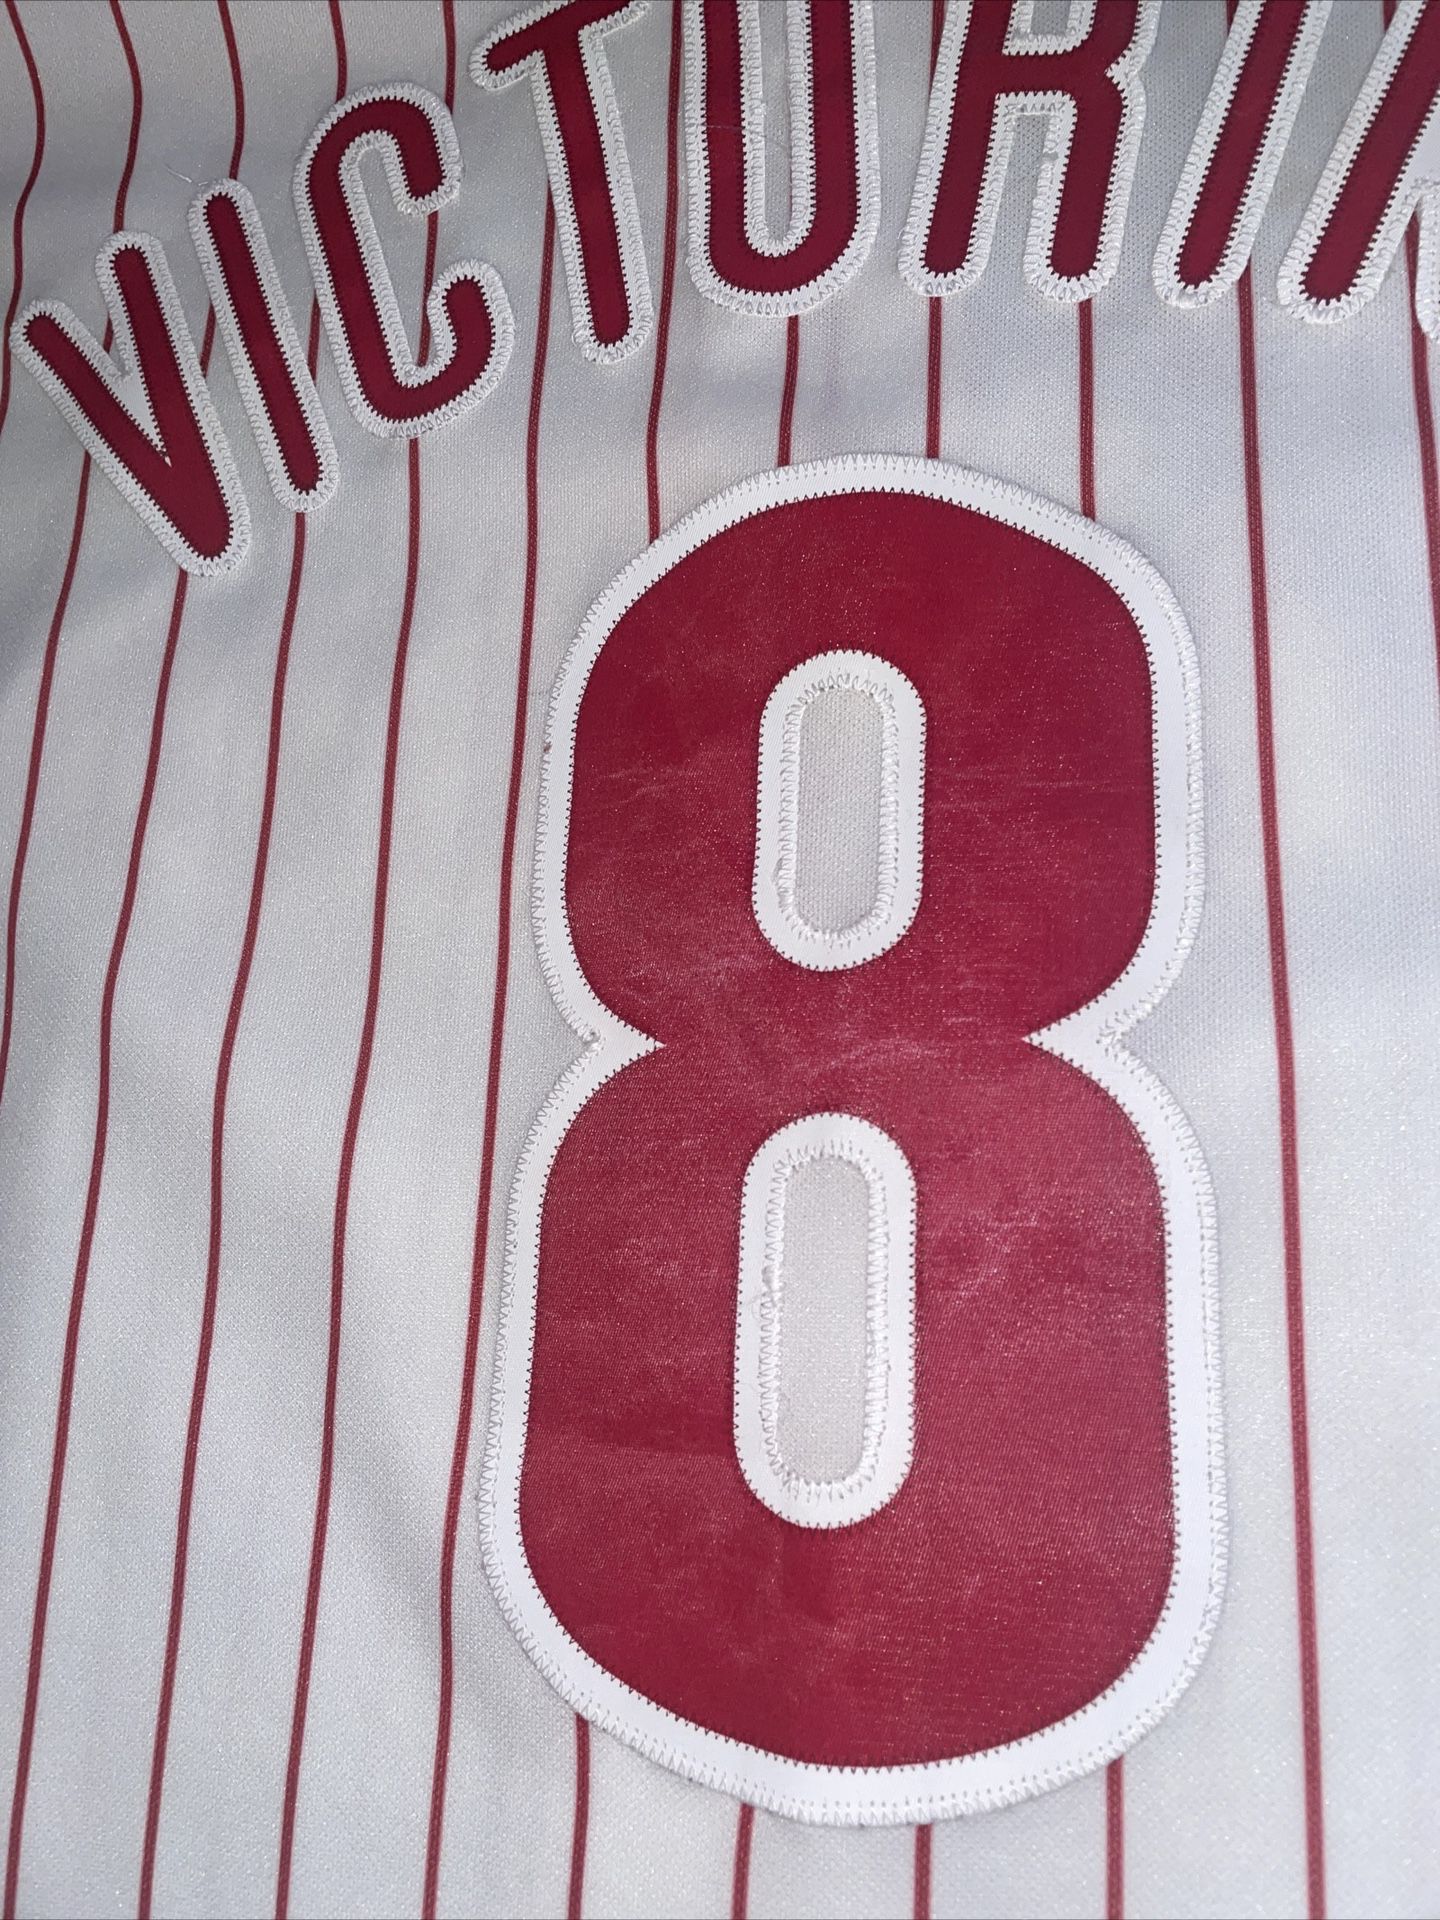 Philadelphia Phillies Authentic World Series Shane Victorino Jersey for  Sale in Pinole, CA - OfferUp